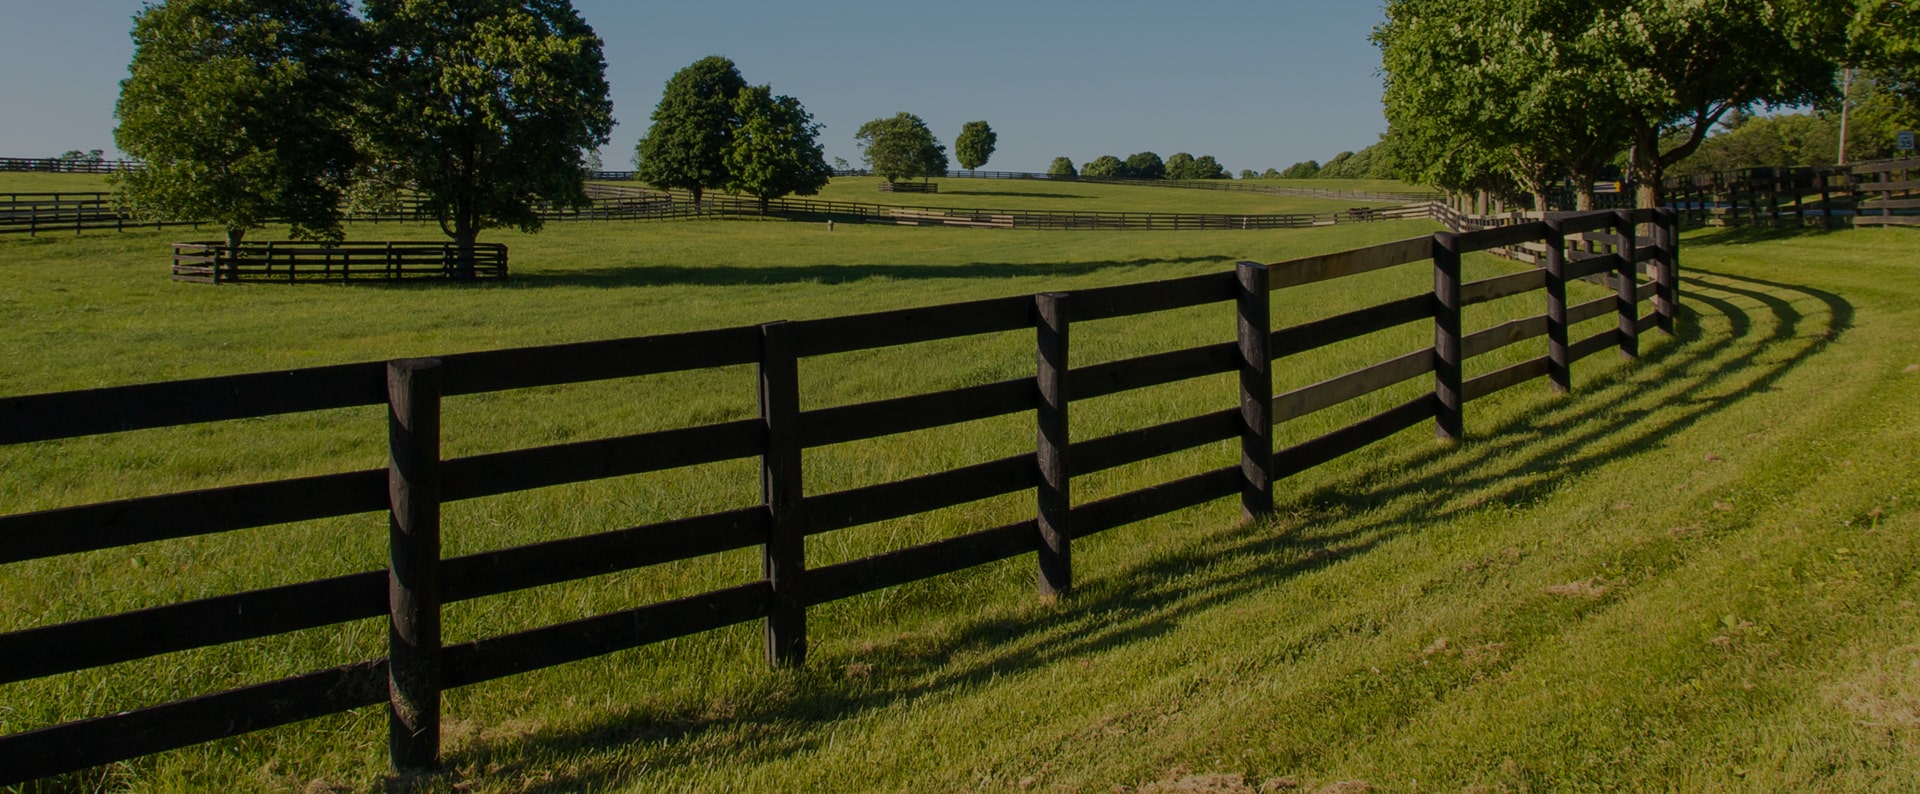 The Top Rail Fence Blog